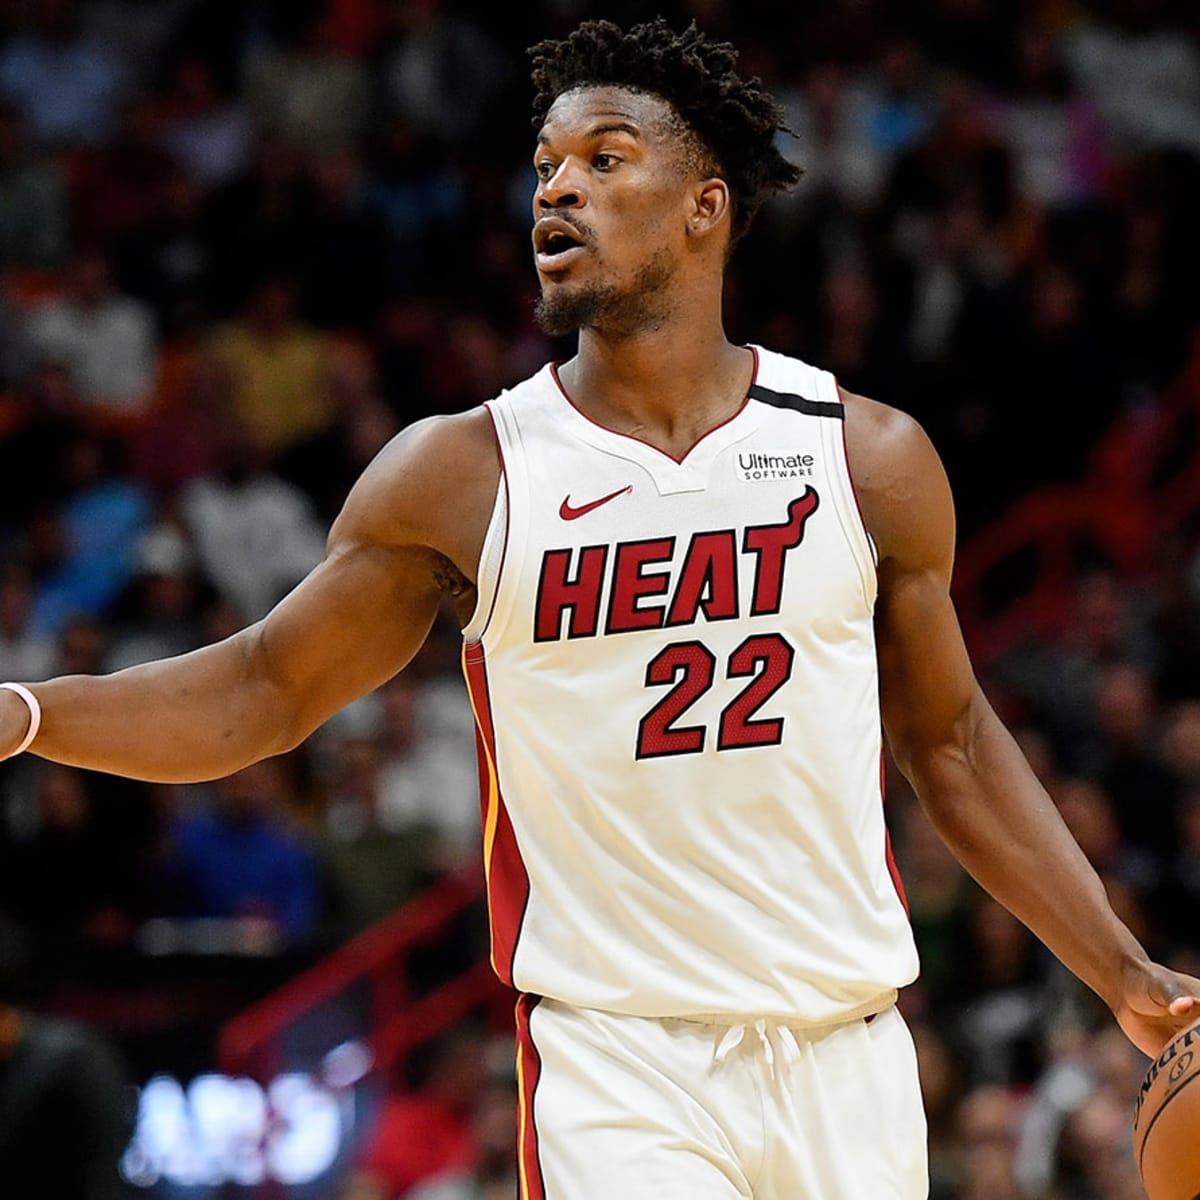 Jimmy Butler would have fit really well on the Indiana Pacers